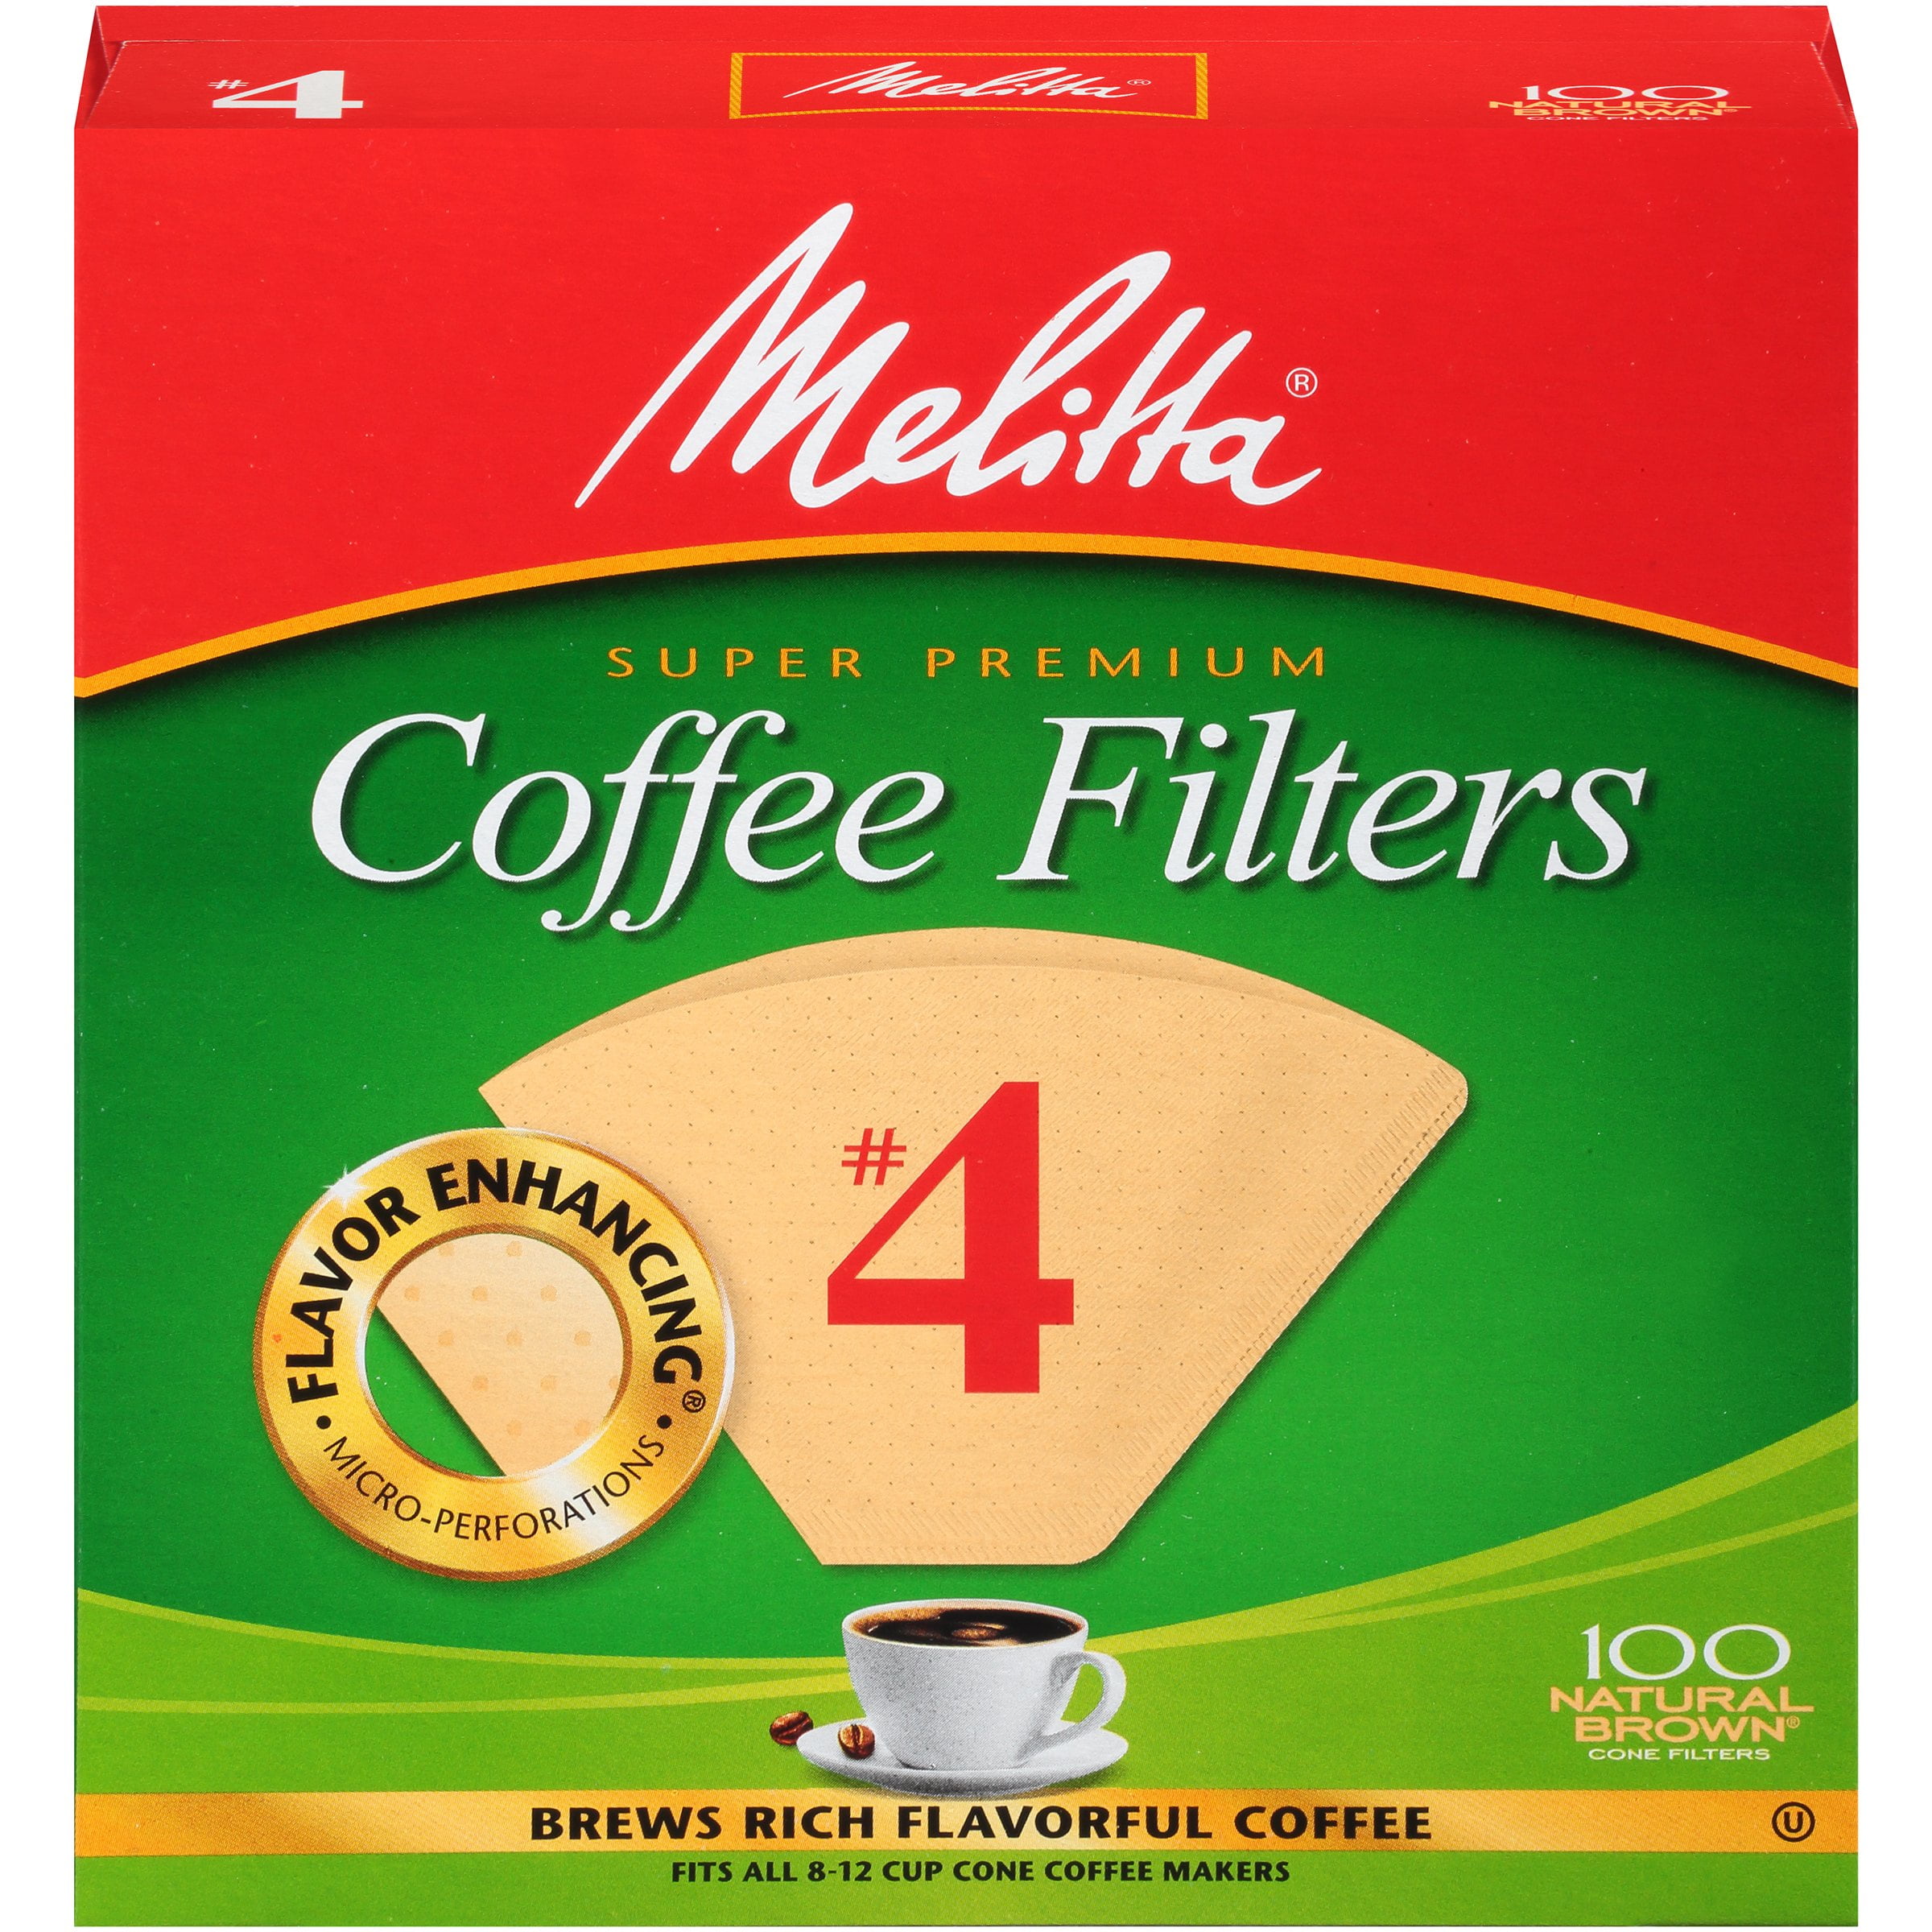 Brand NEW & SEALED!! Total: 300 Ct Natural Brew #4 Coffee Filters 3 x 100 Ct 